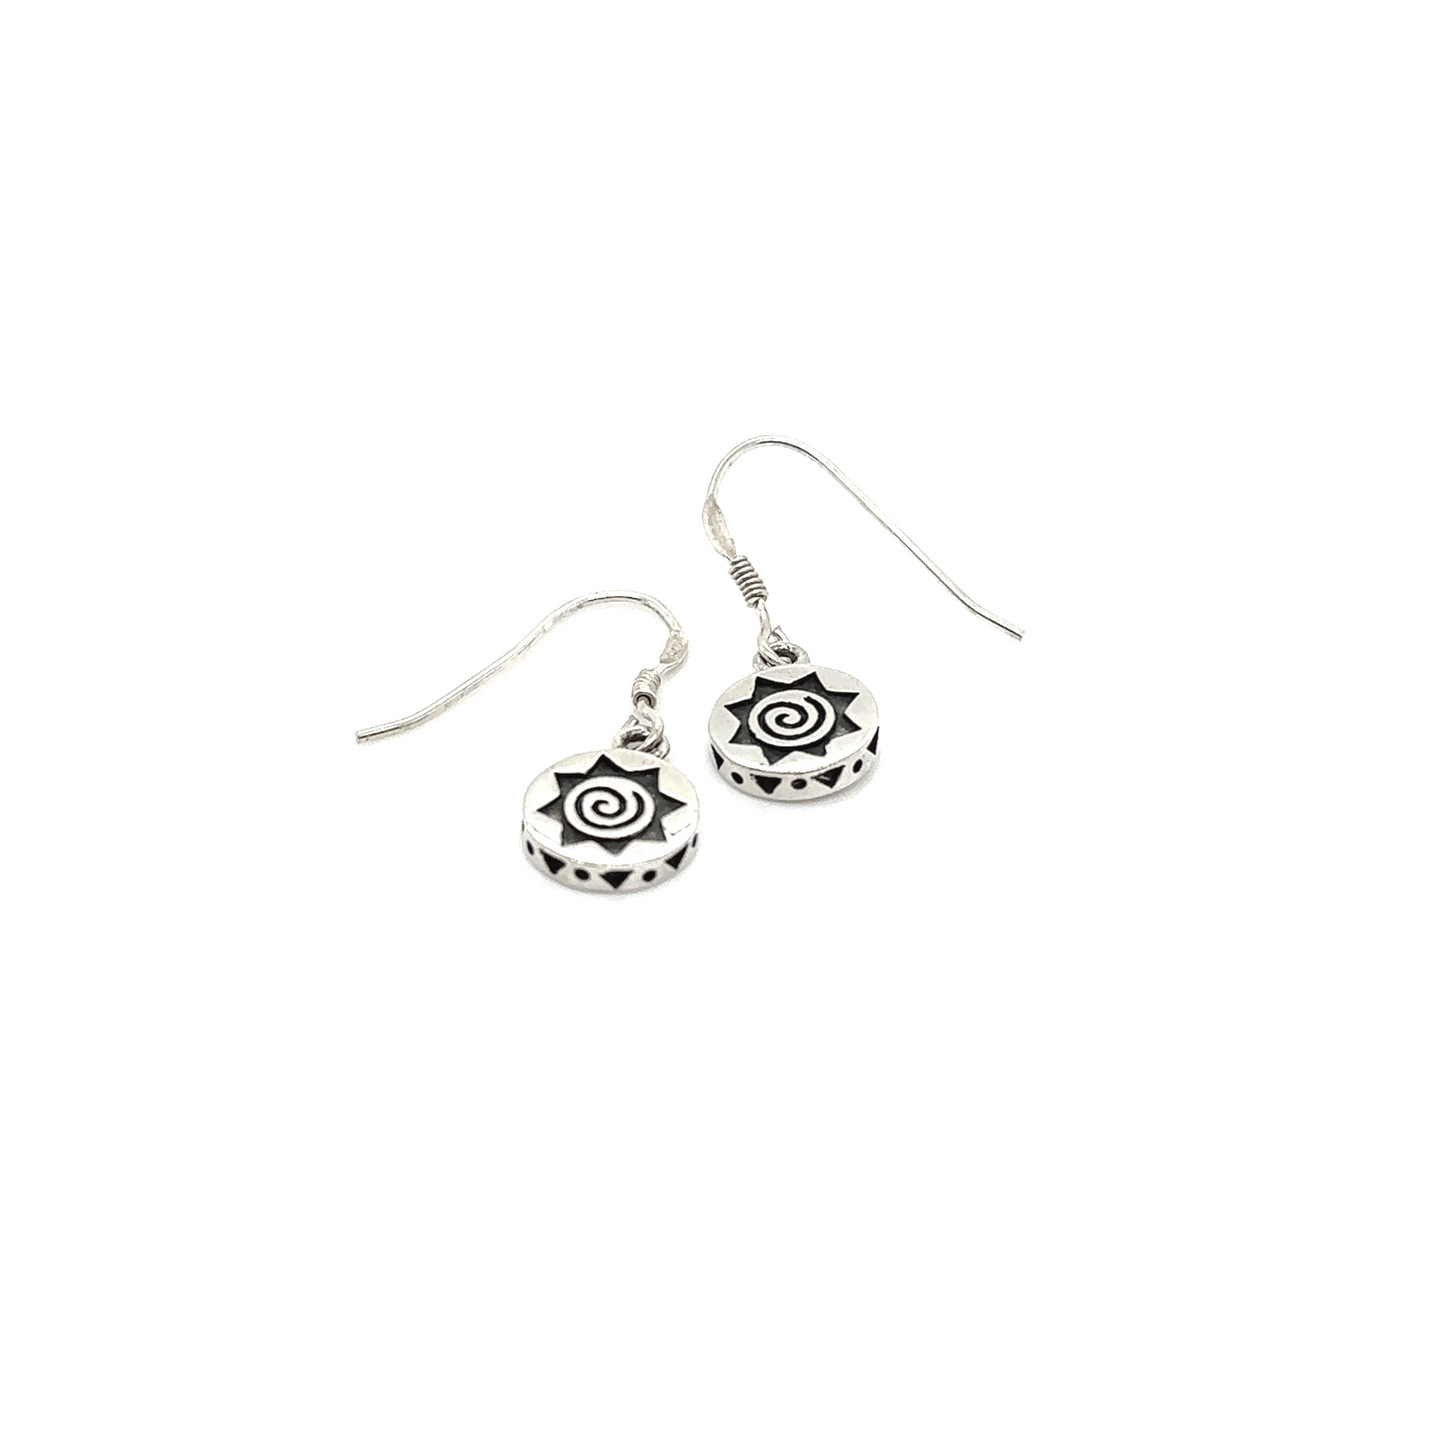 Dazzling Star Symbol Earrings with a flower on them. (From Super Silver)